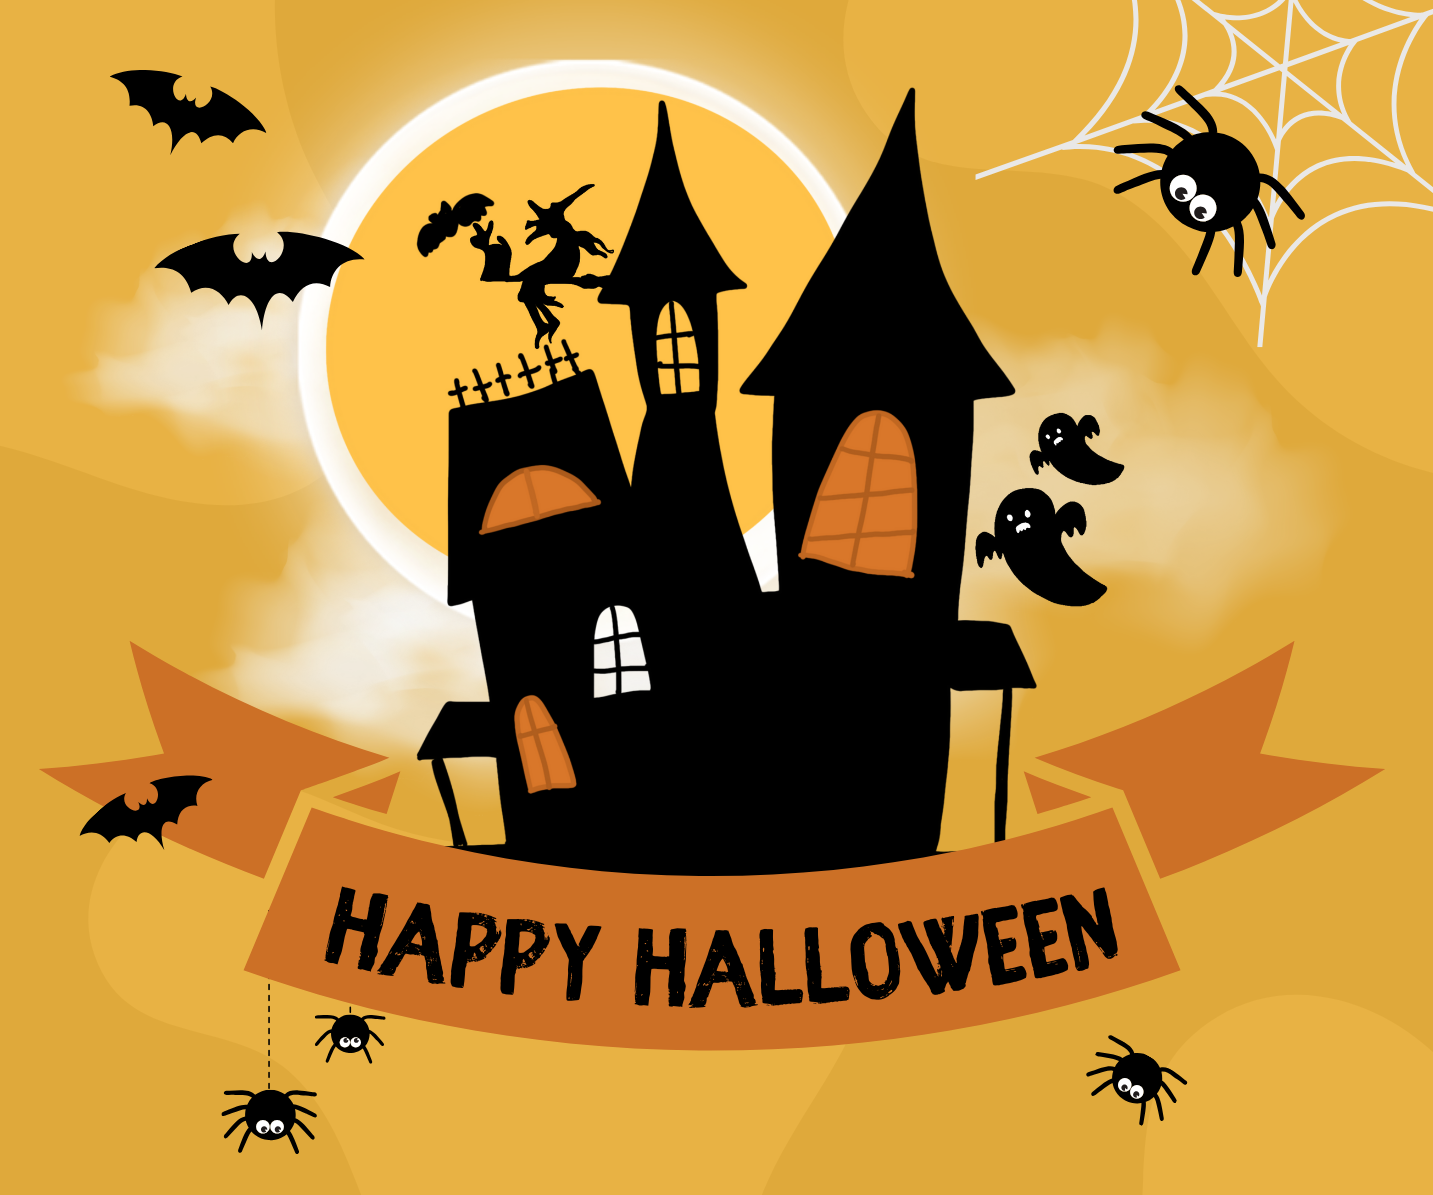 A black silhouette of a haunted house on an orange background with bats and spiders around it and the words "Happy Halloween" underneath